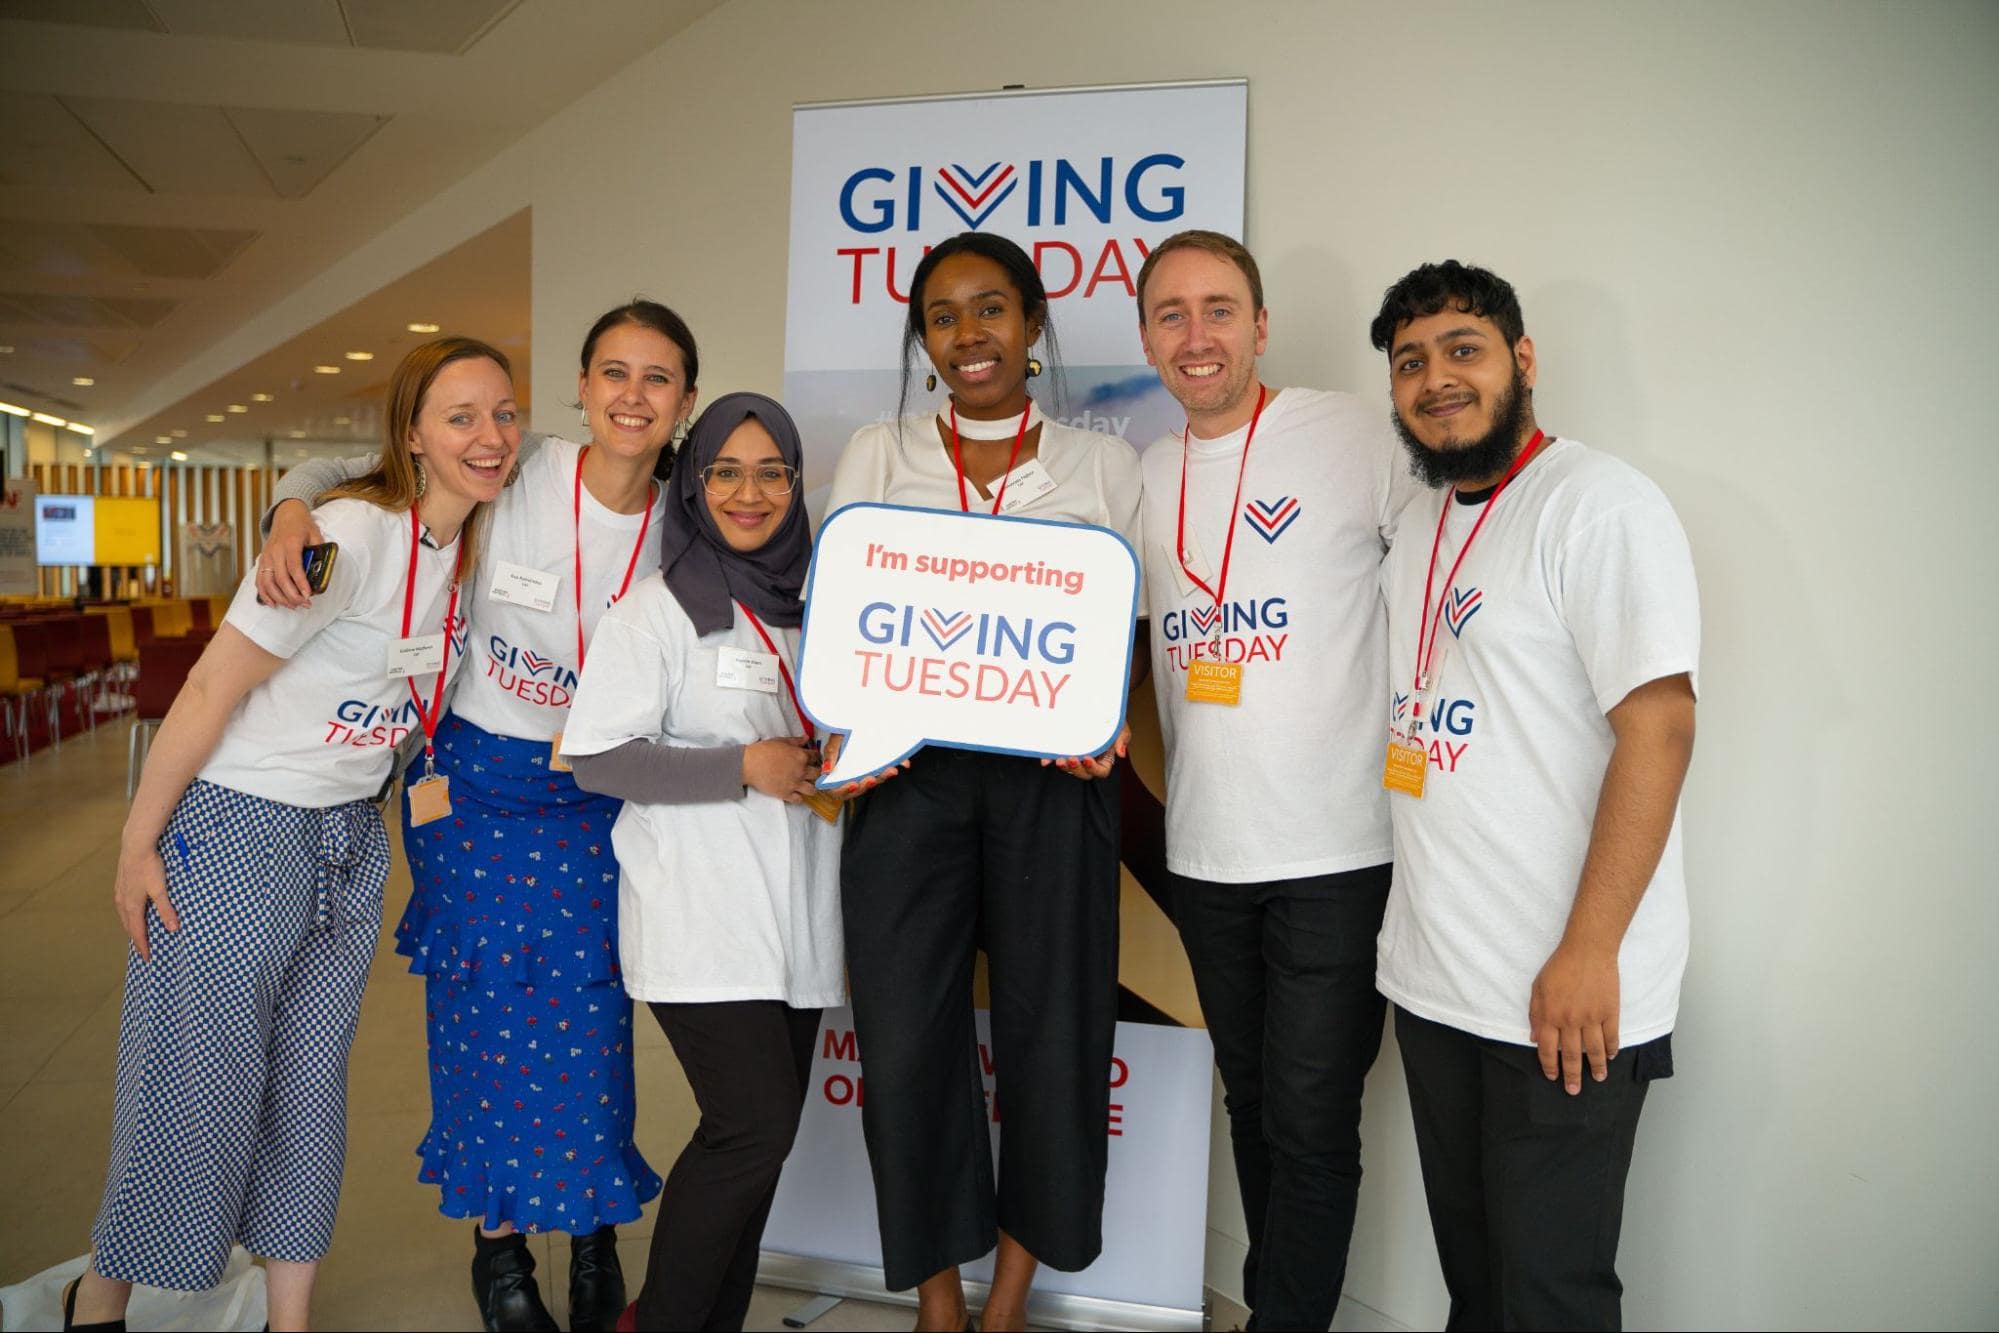 Giving Tuesday ideas - Images 4 - BLOG  The Giving Block